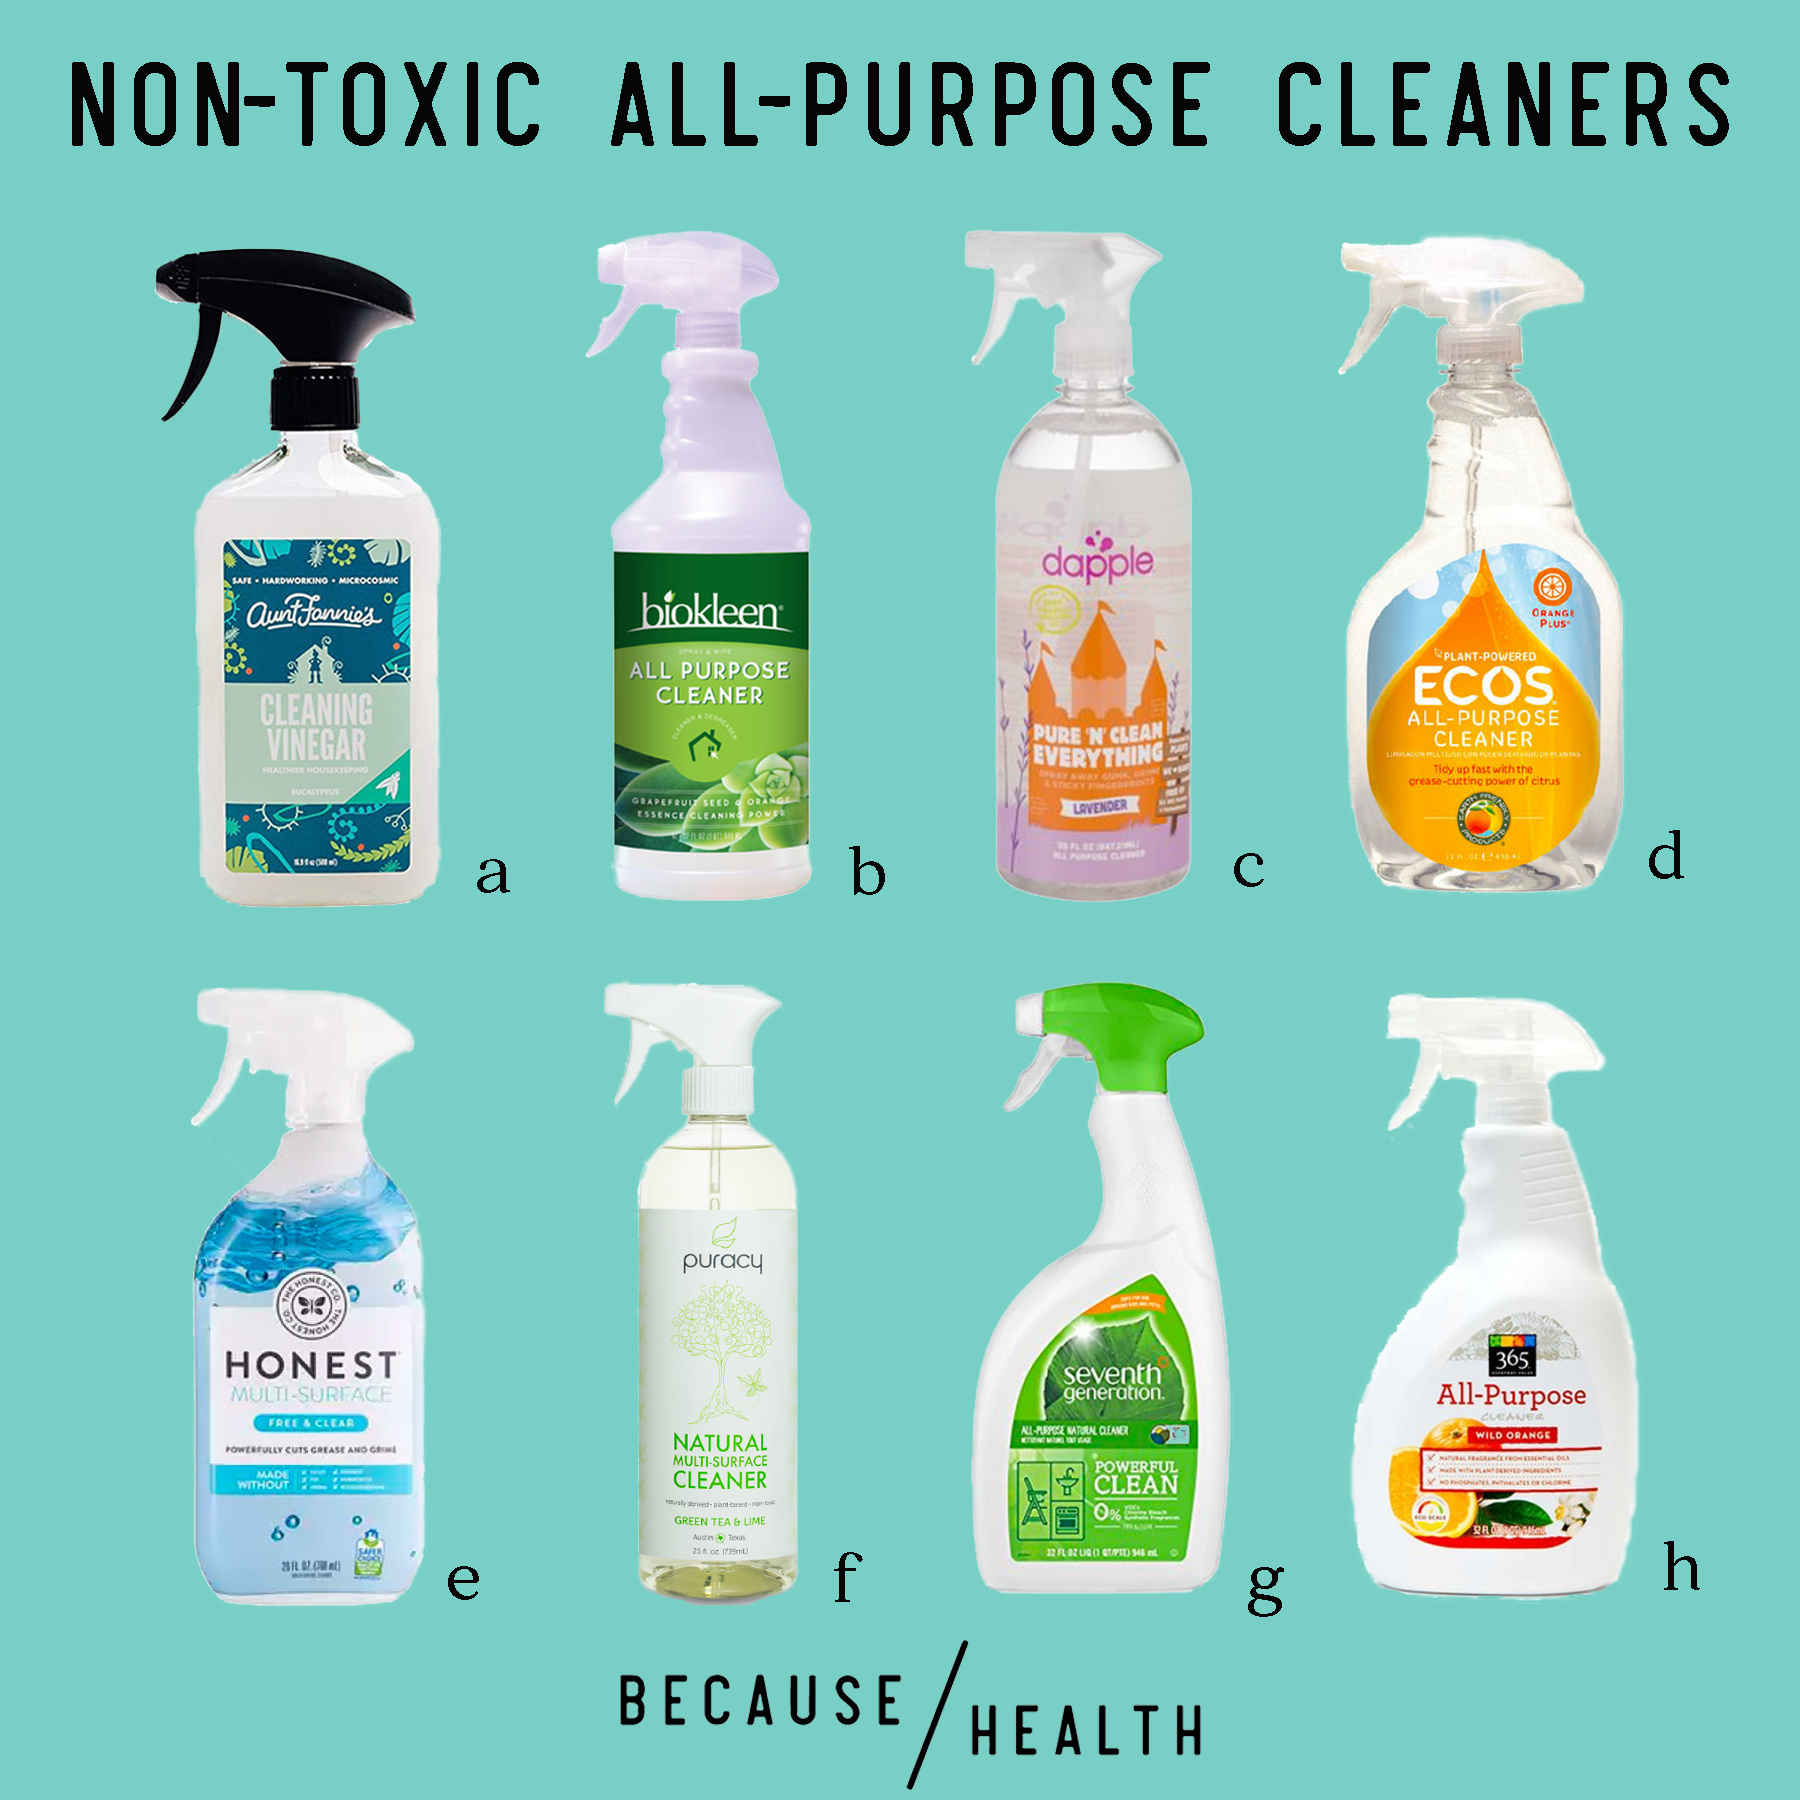 Non-toxic cleaning products